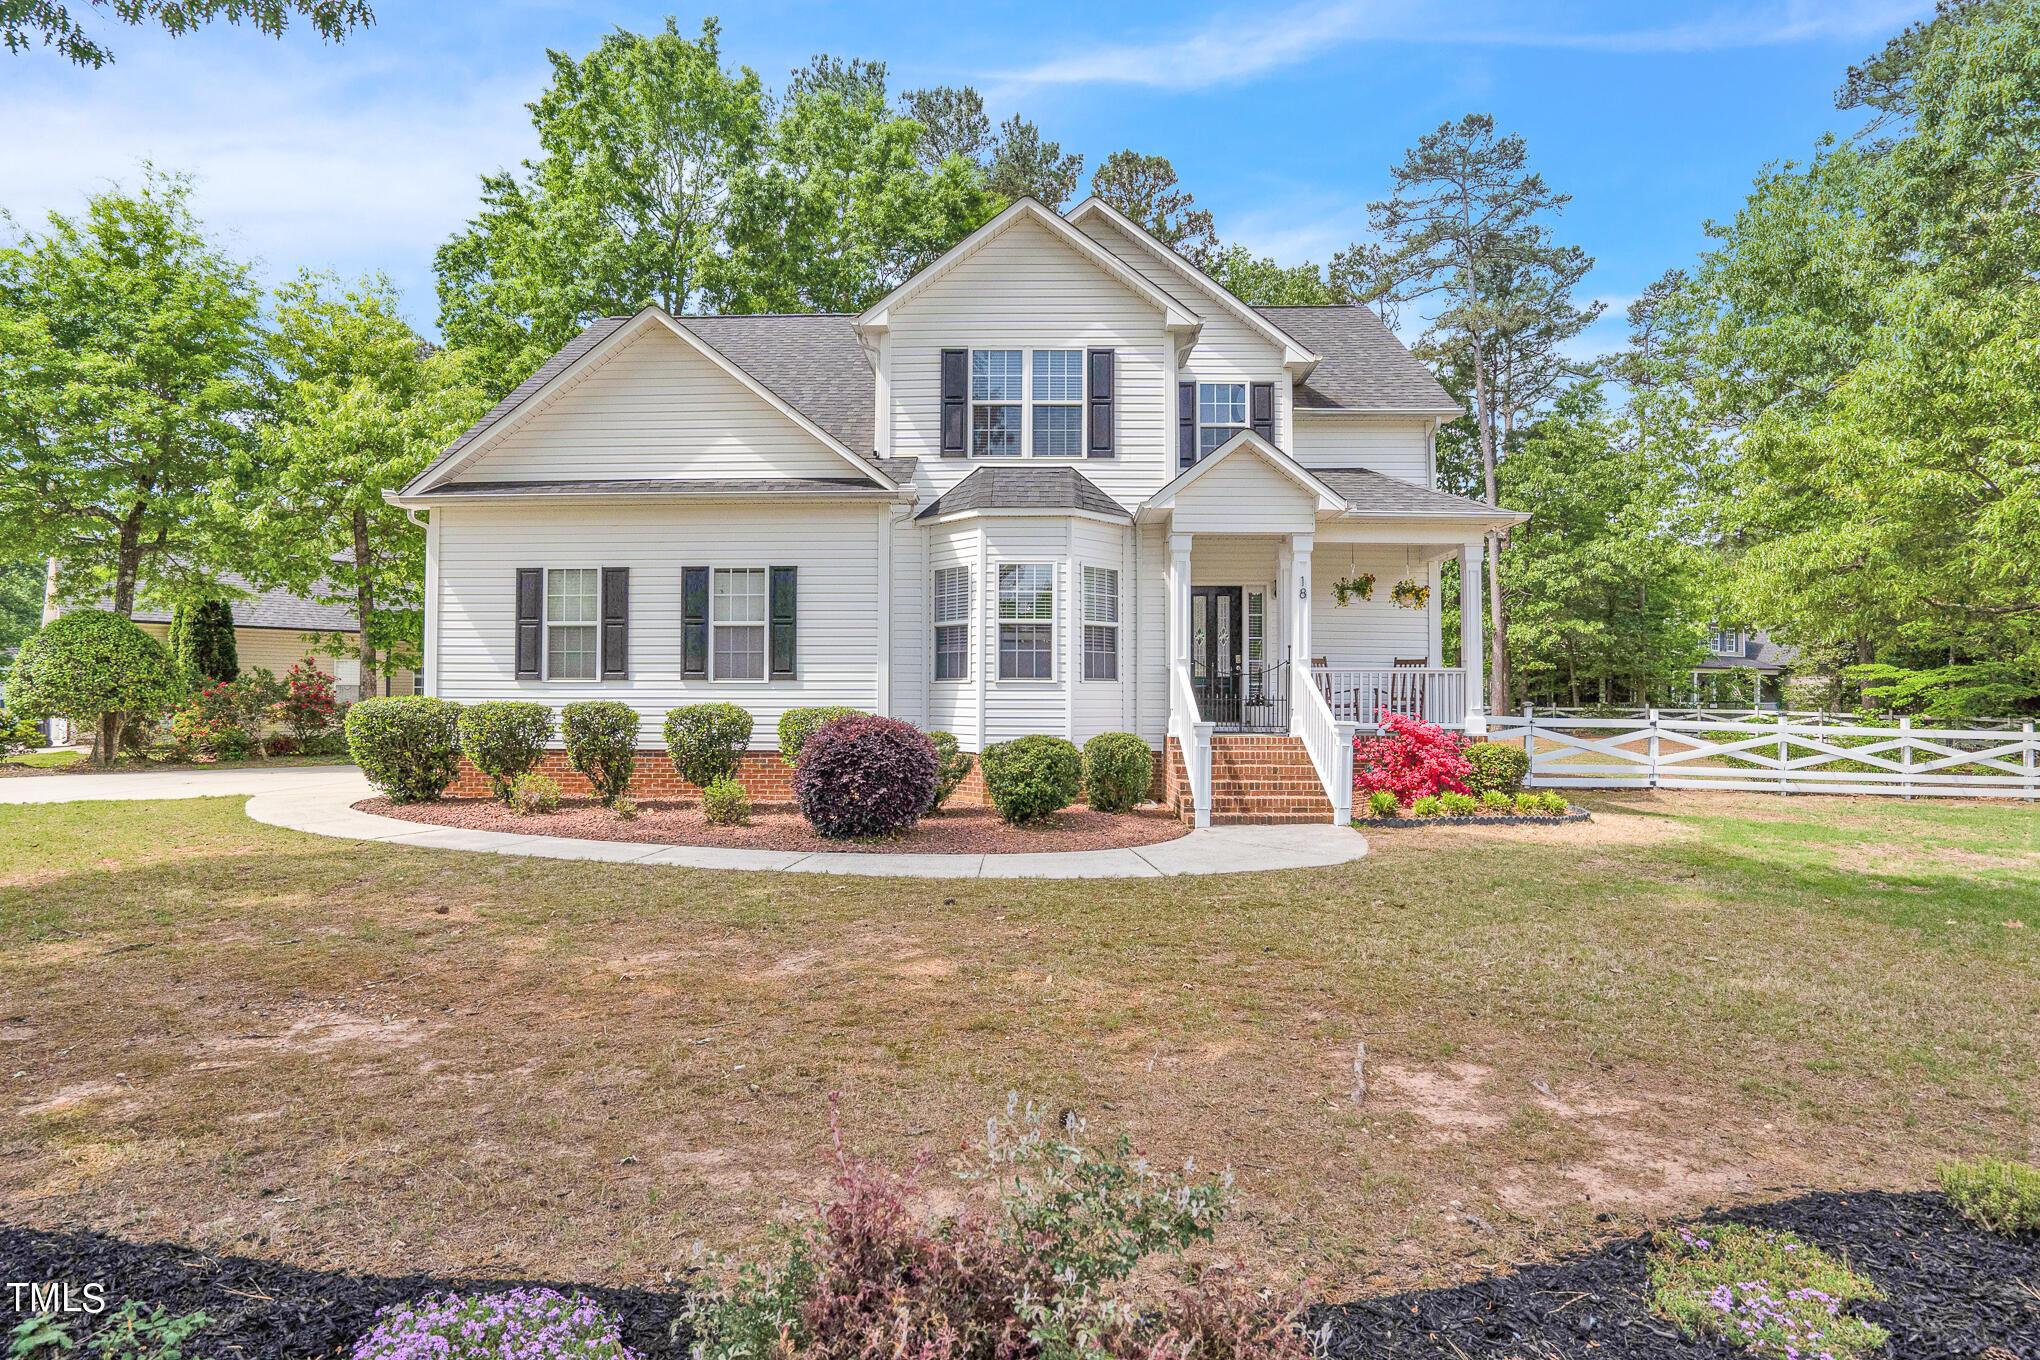 Photo one of 18 Fox Pen Dr Raleigh NC 27603 | MLS 10025618